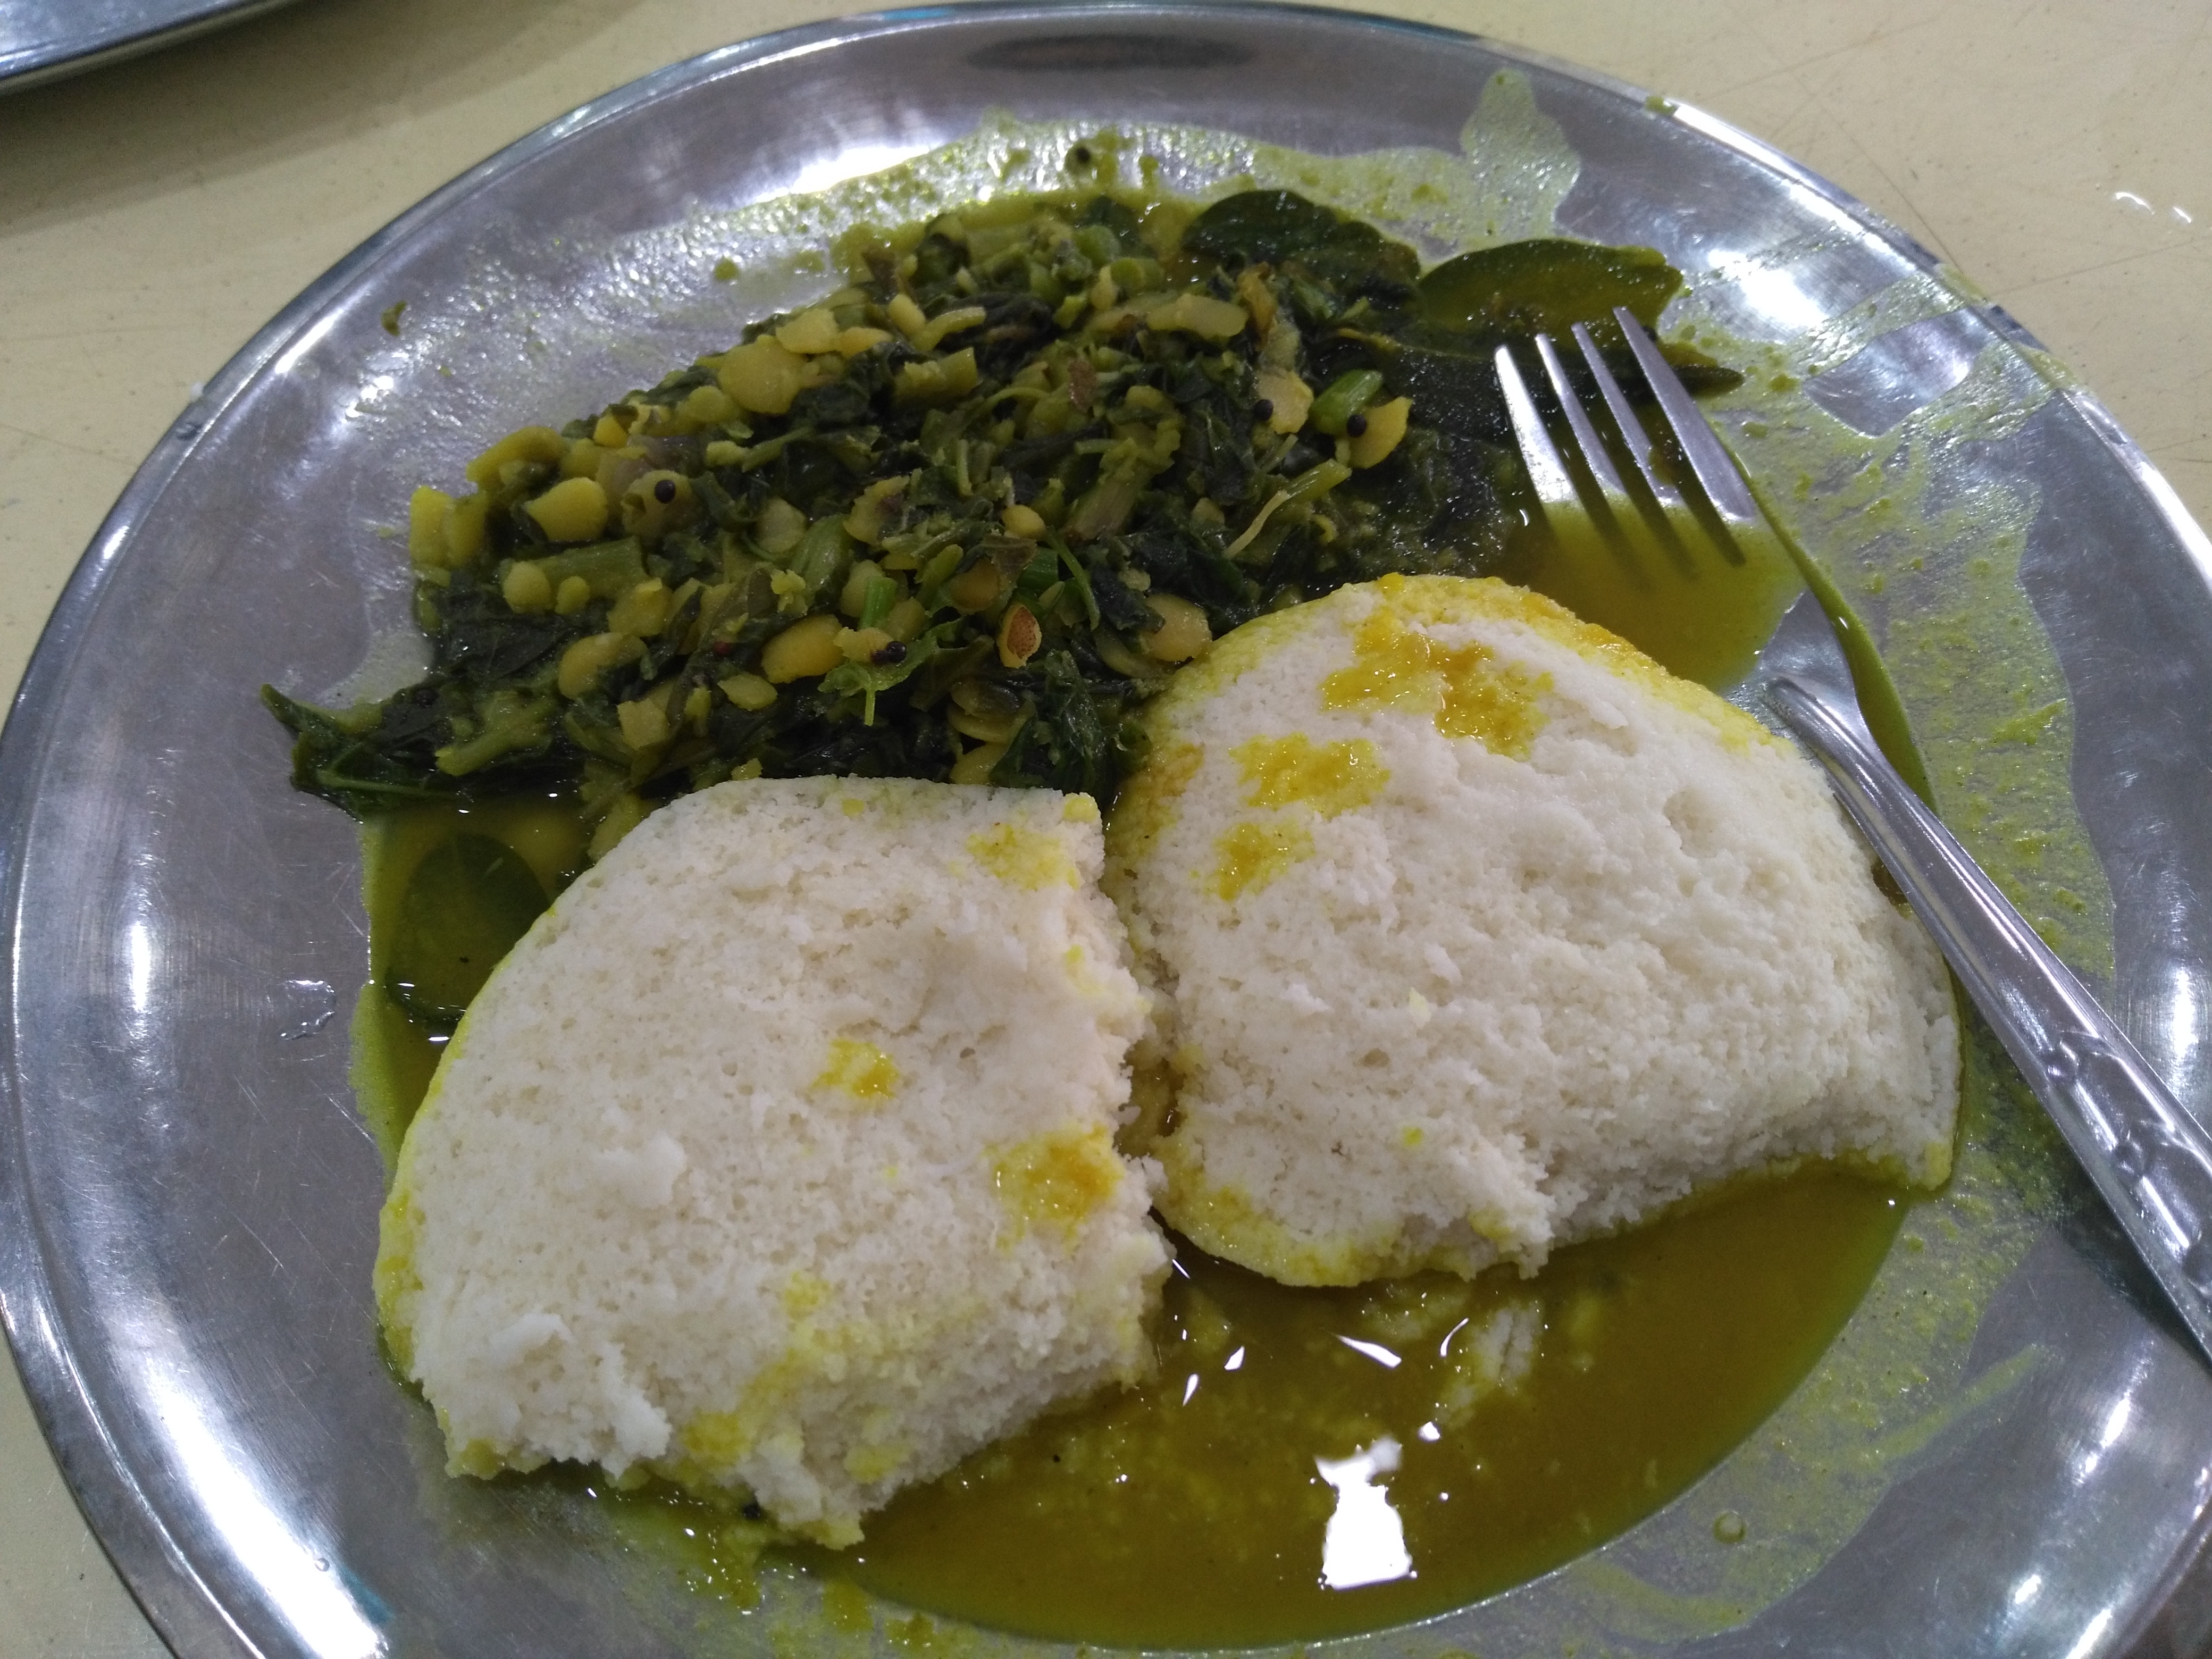 Idli and spinach/dal side dish.